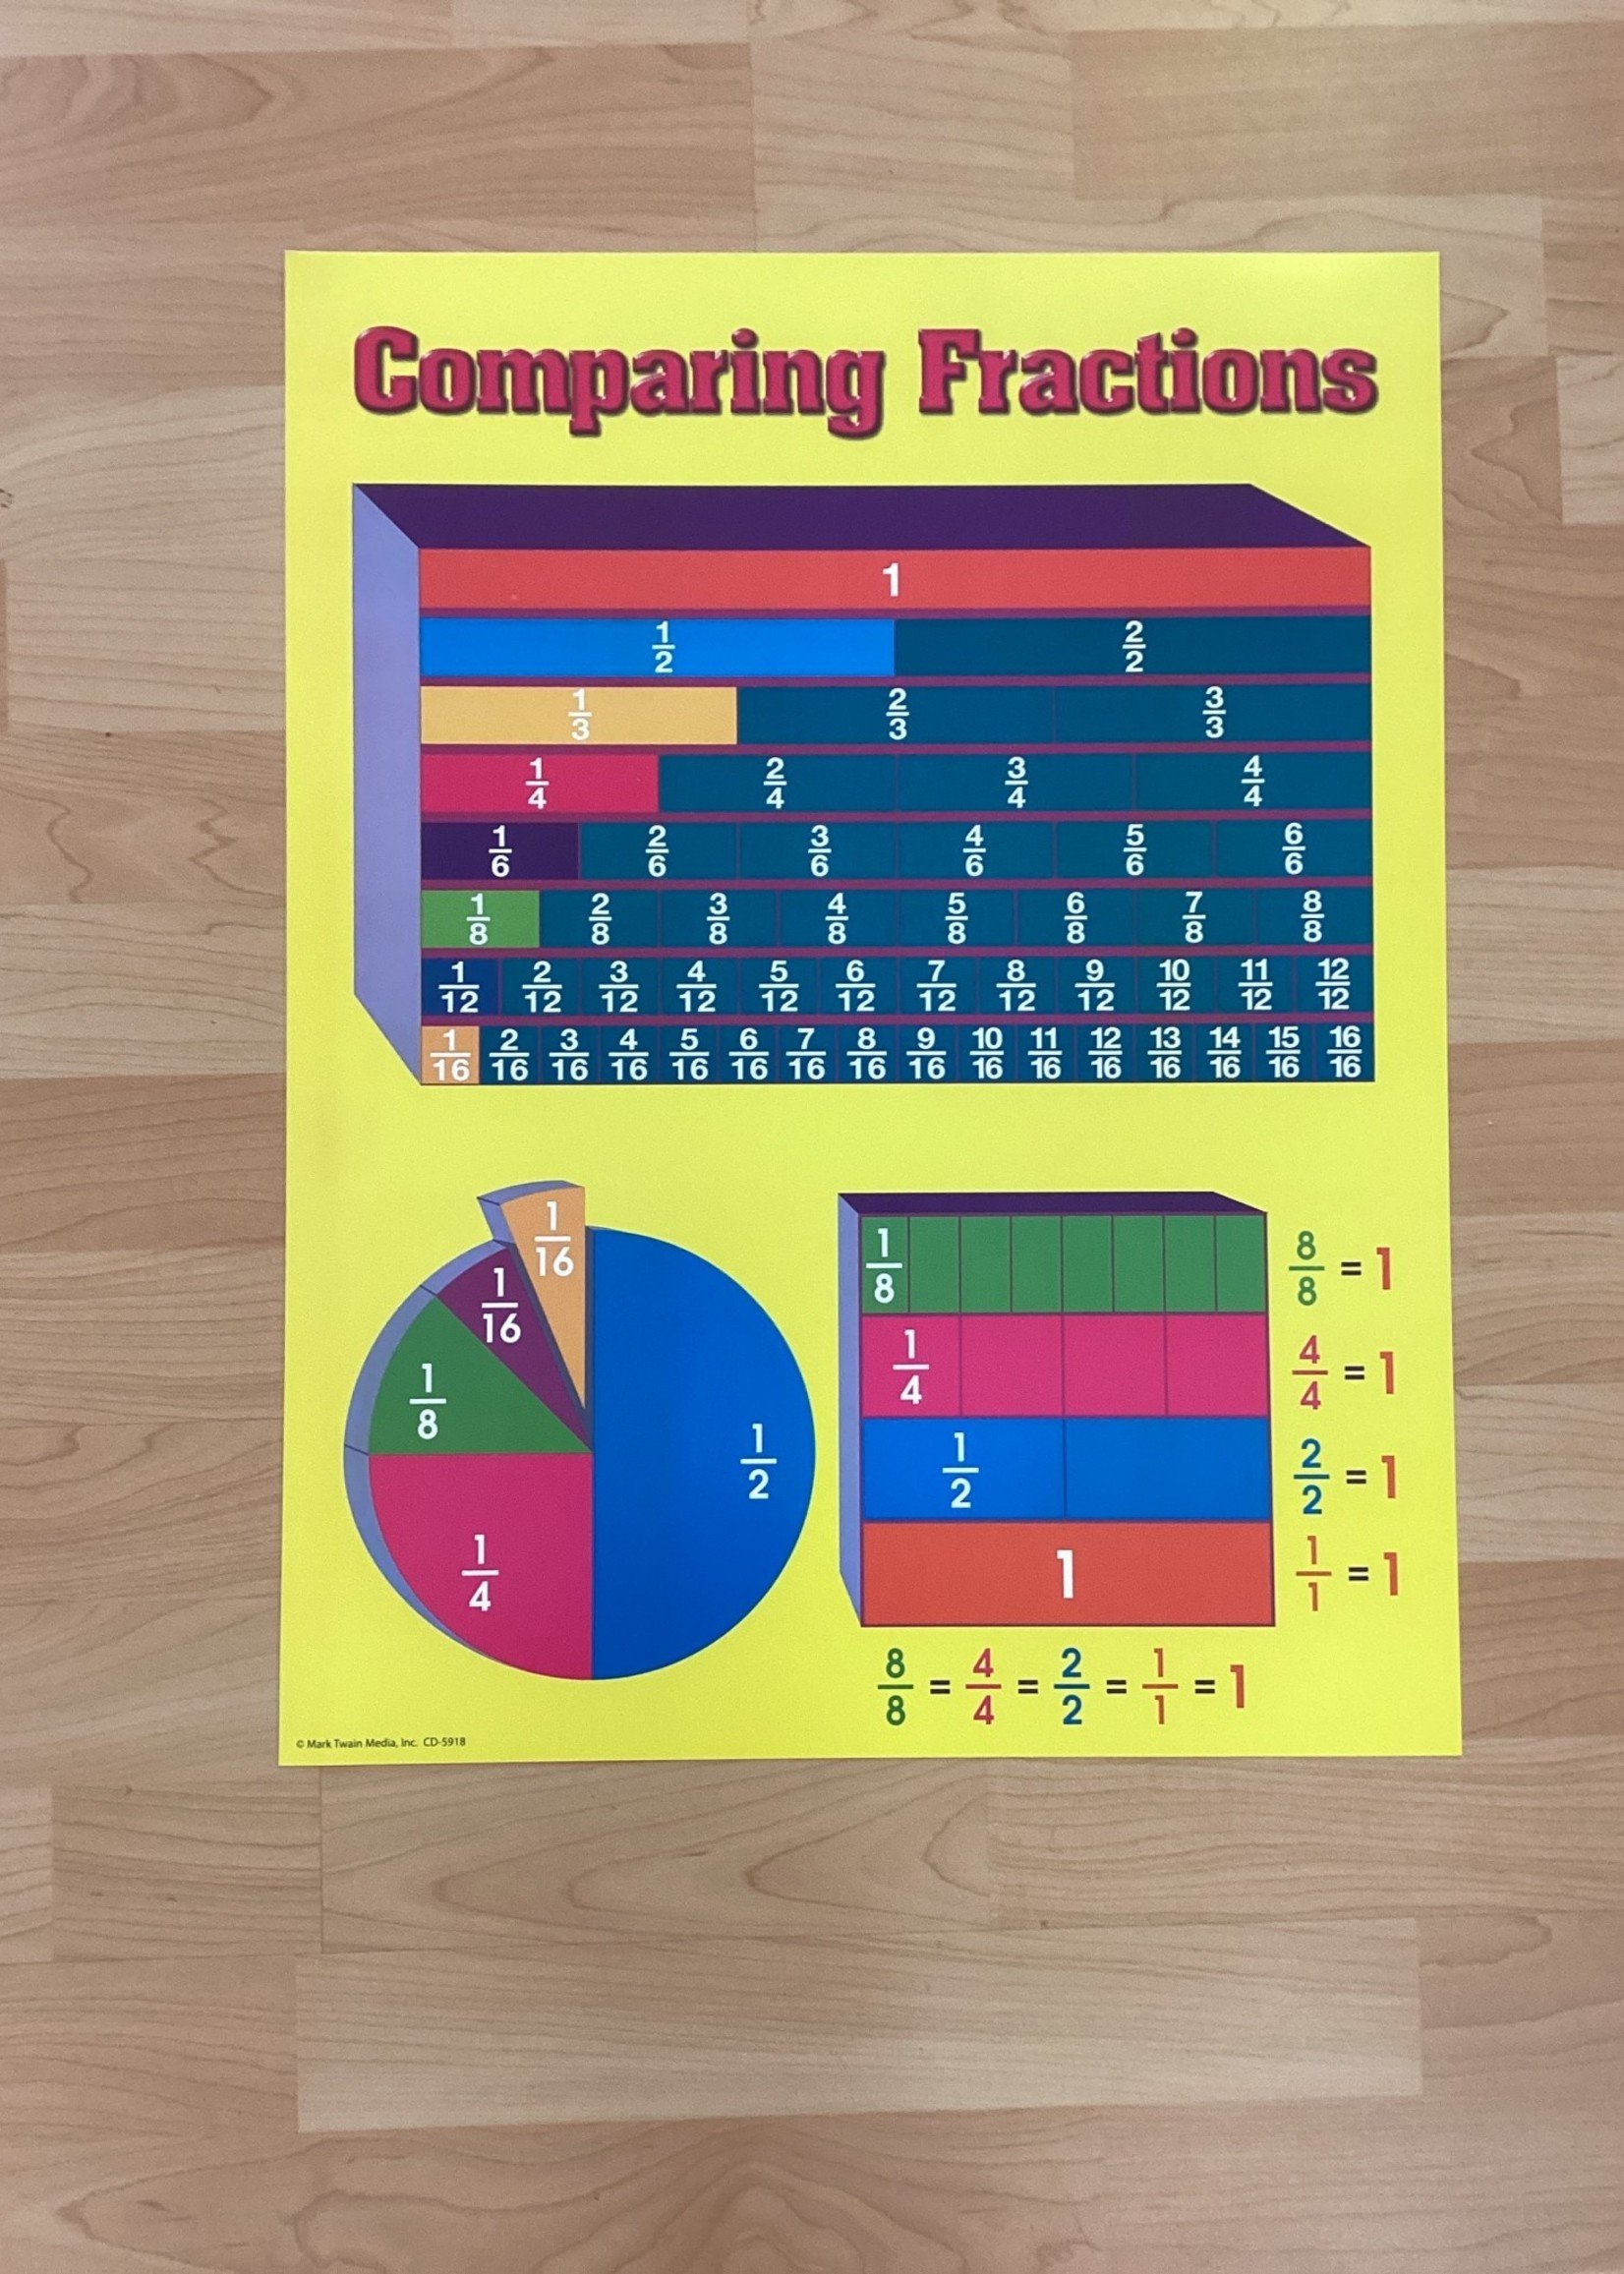 Comparing Fractions Chart